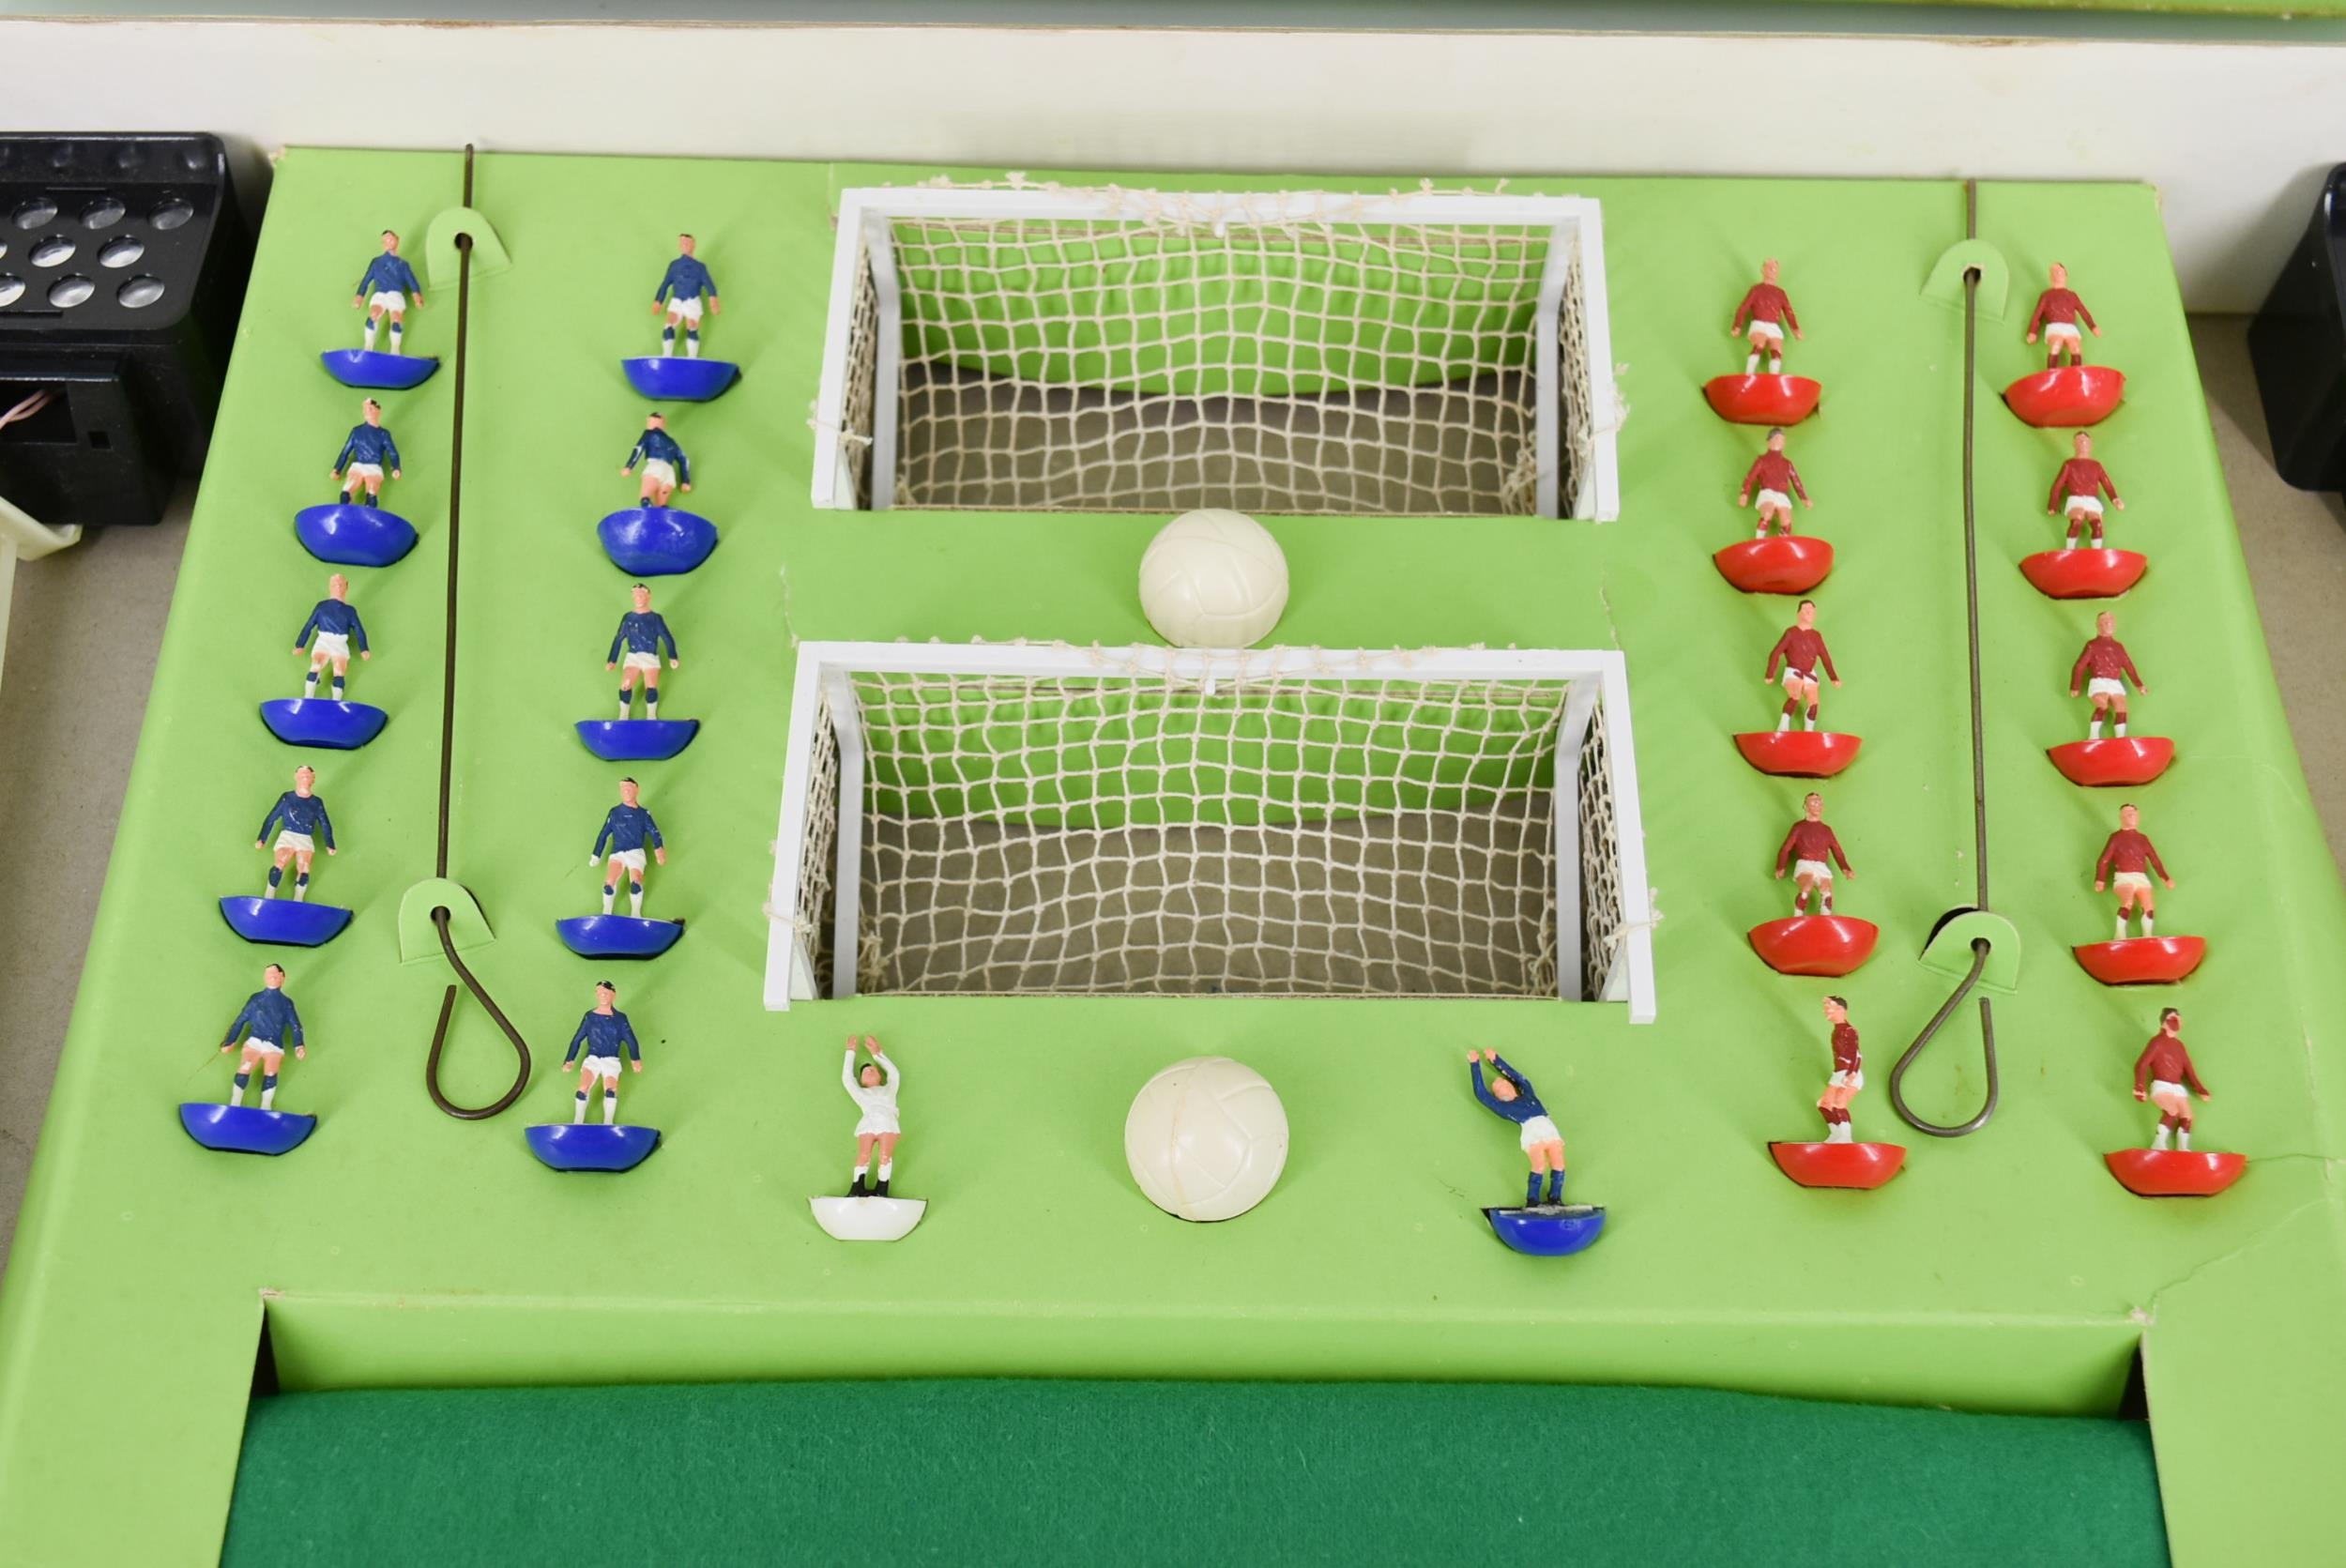 A vintage Subbuteo 'Floodlighting' edition set with box and acrylic pieces. (complete) - Image 3 of 4